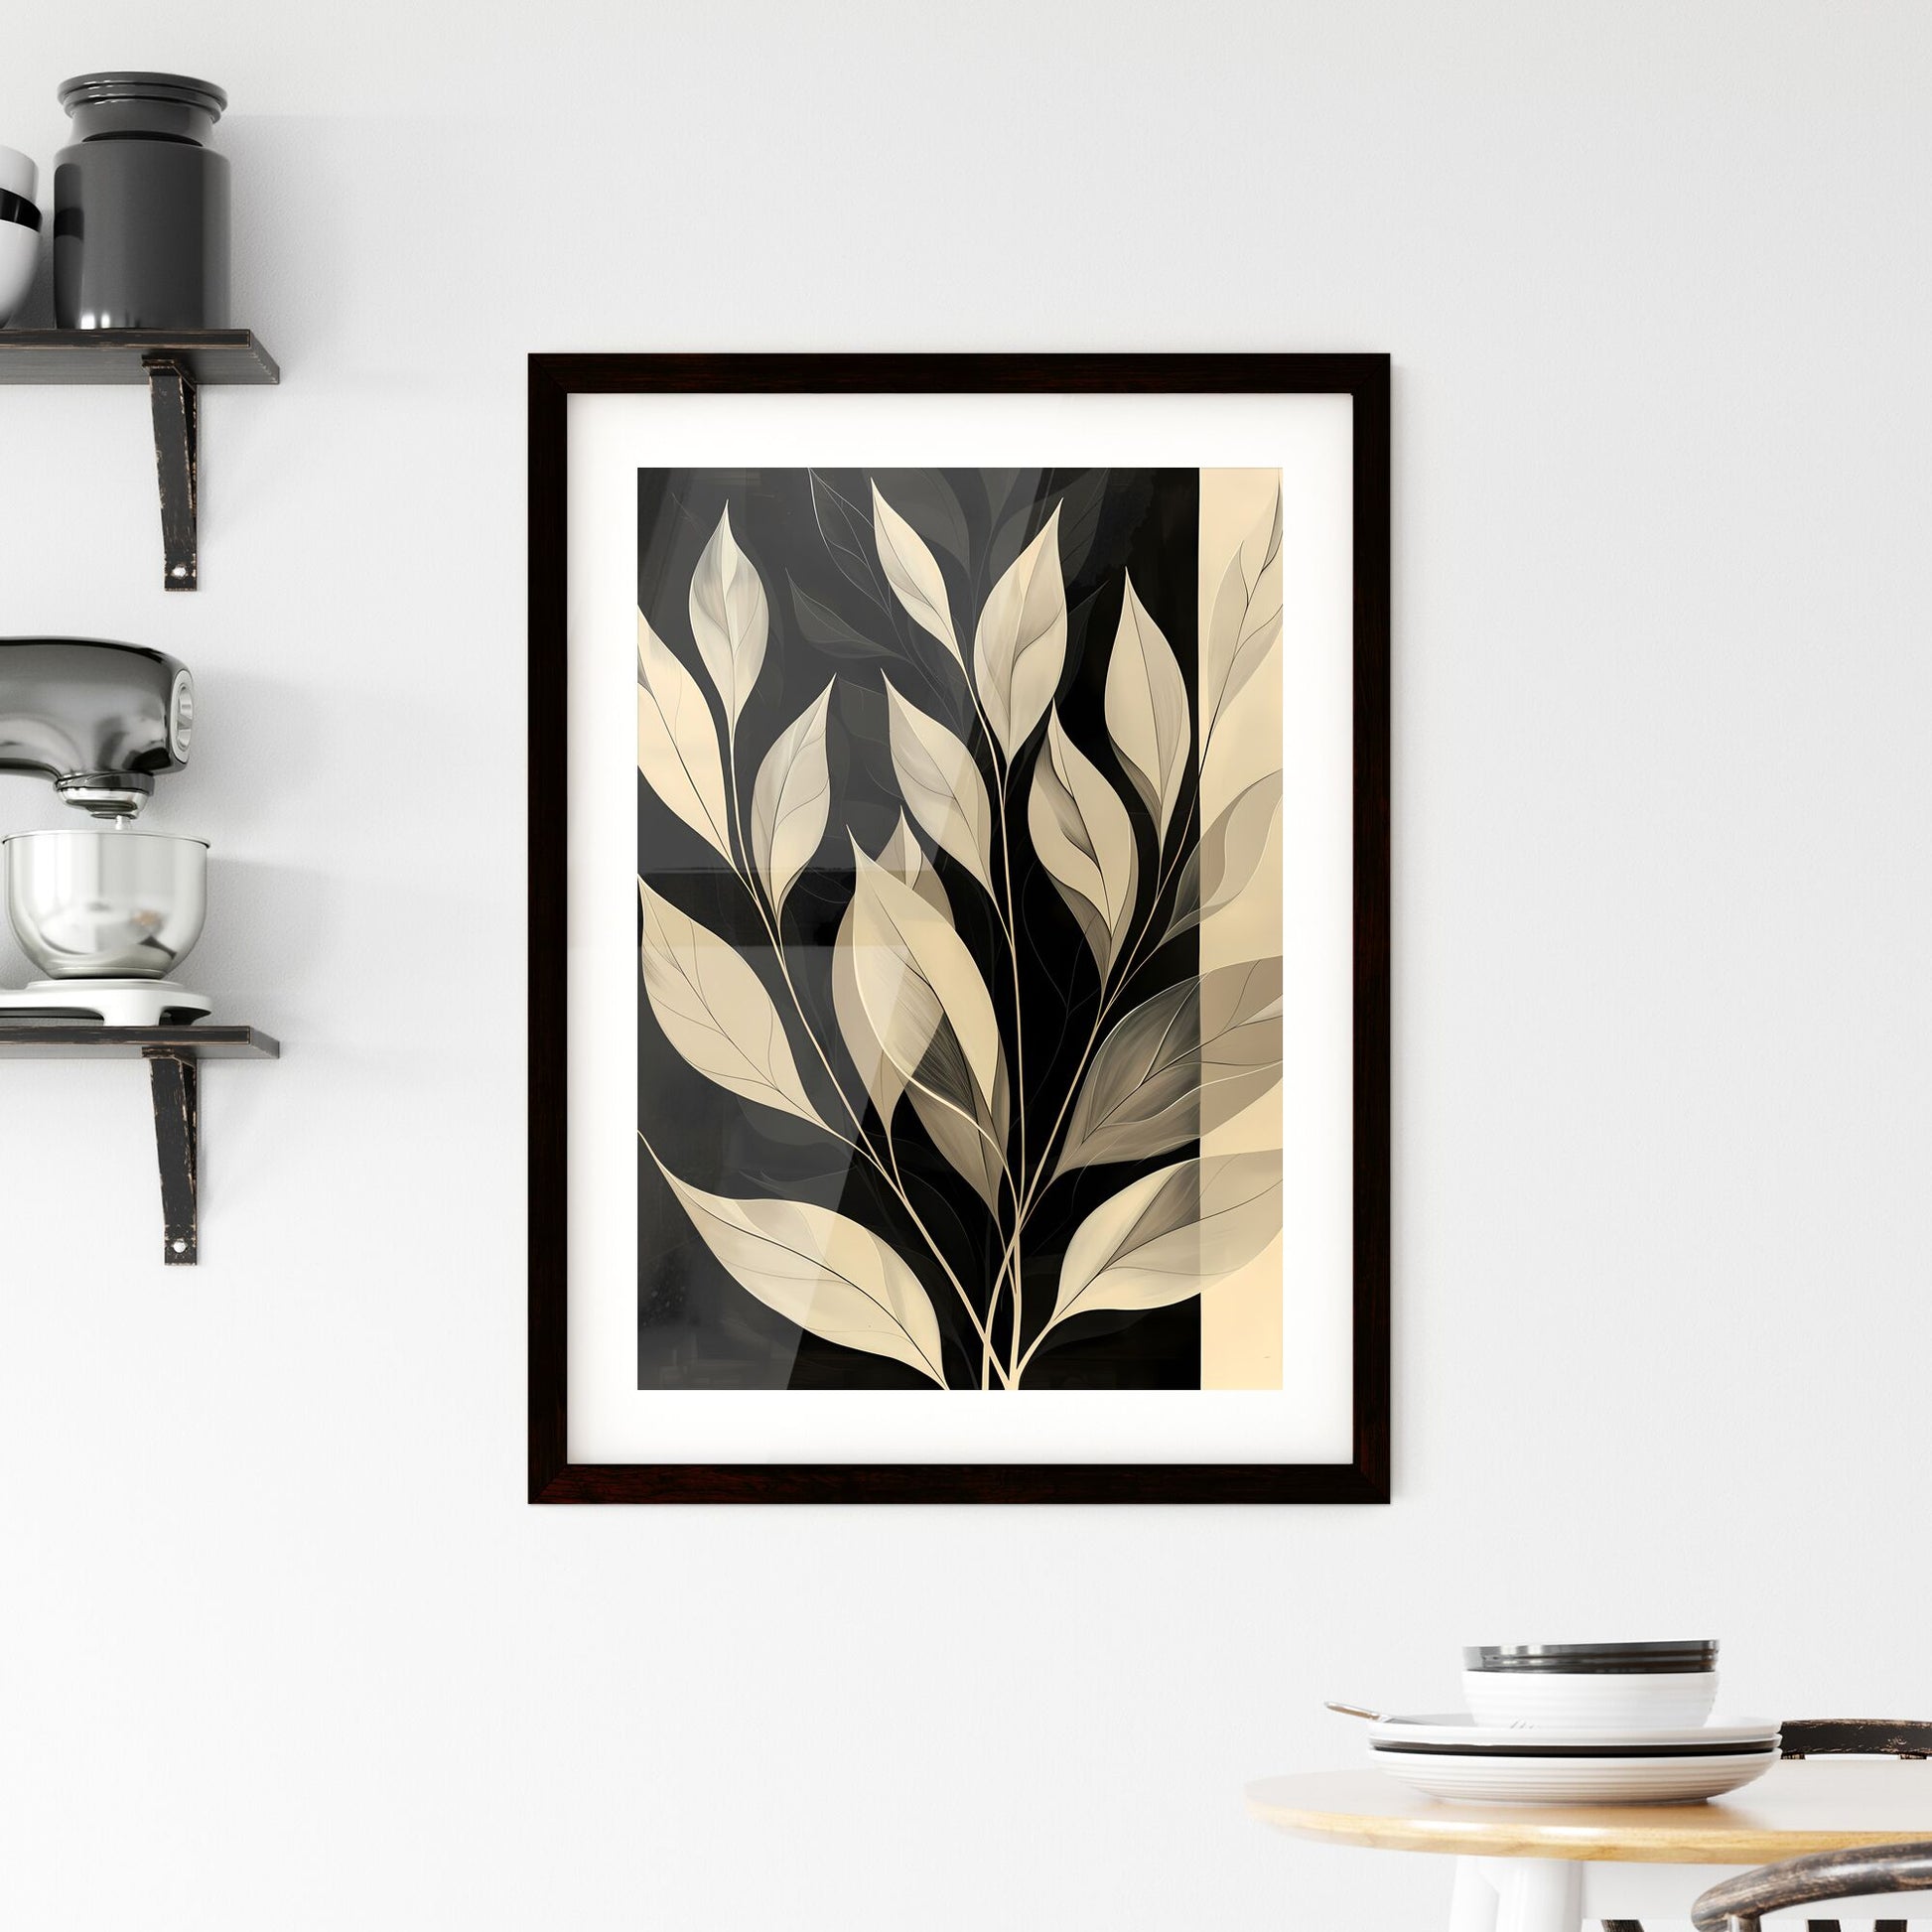 Vibrant Black and White Abstract Leaf Painting: Beige, Organic Shapes, Wavy Lines, Holotone, Bold Stencil, Close-Up Default Title